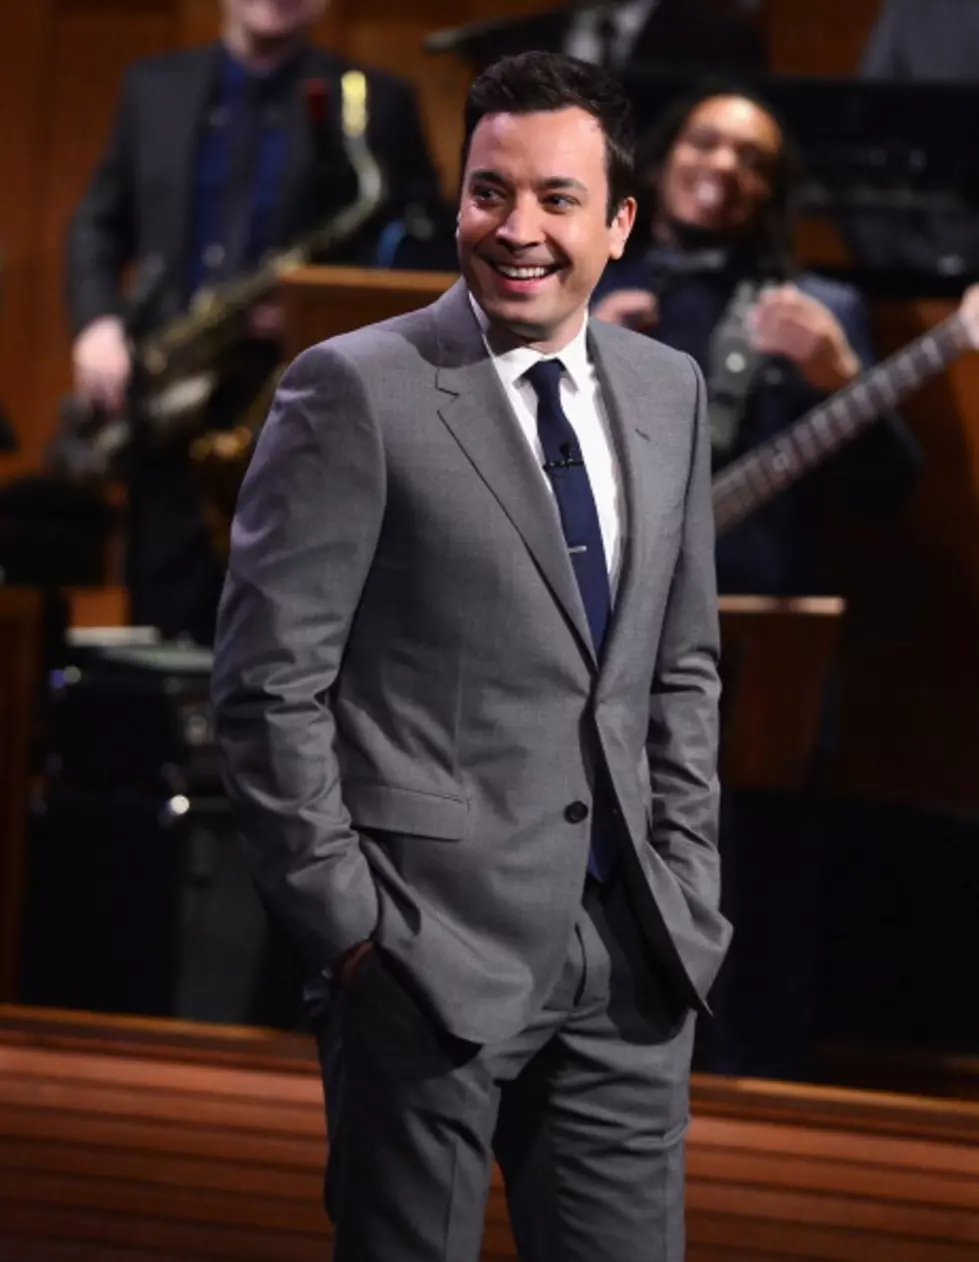 Jimmy Fallon With Gov. Chris Christie &#8211; Evolution of Dad Dancing [Watch]